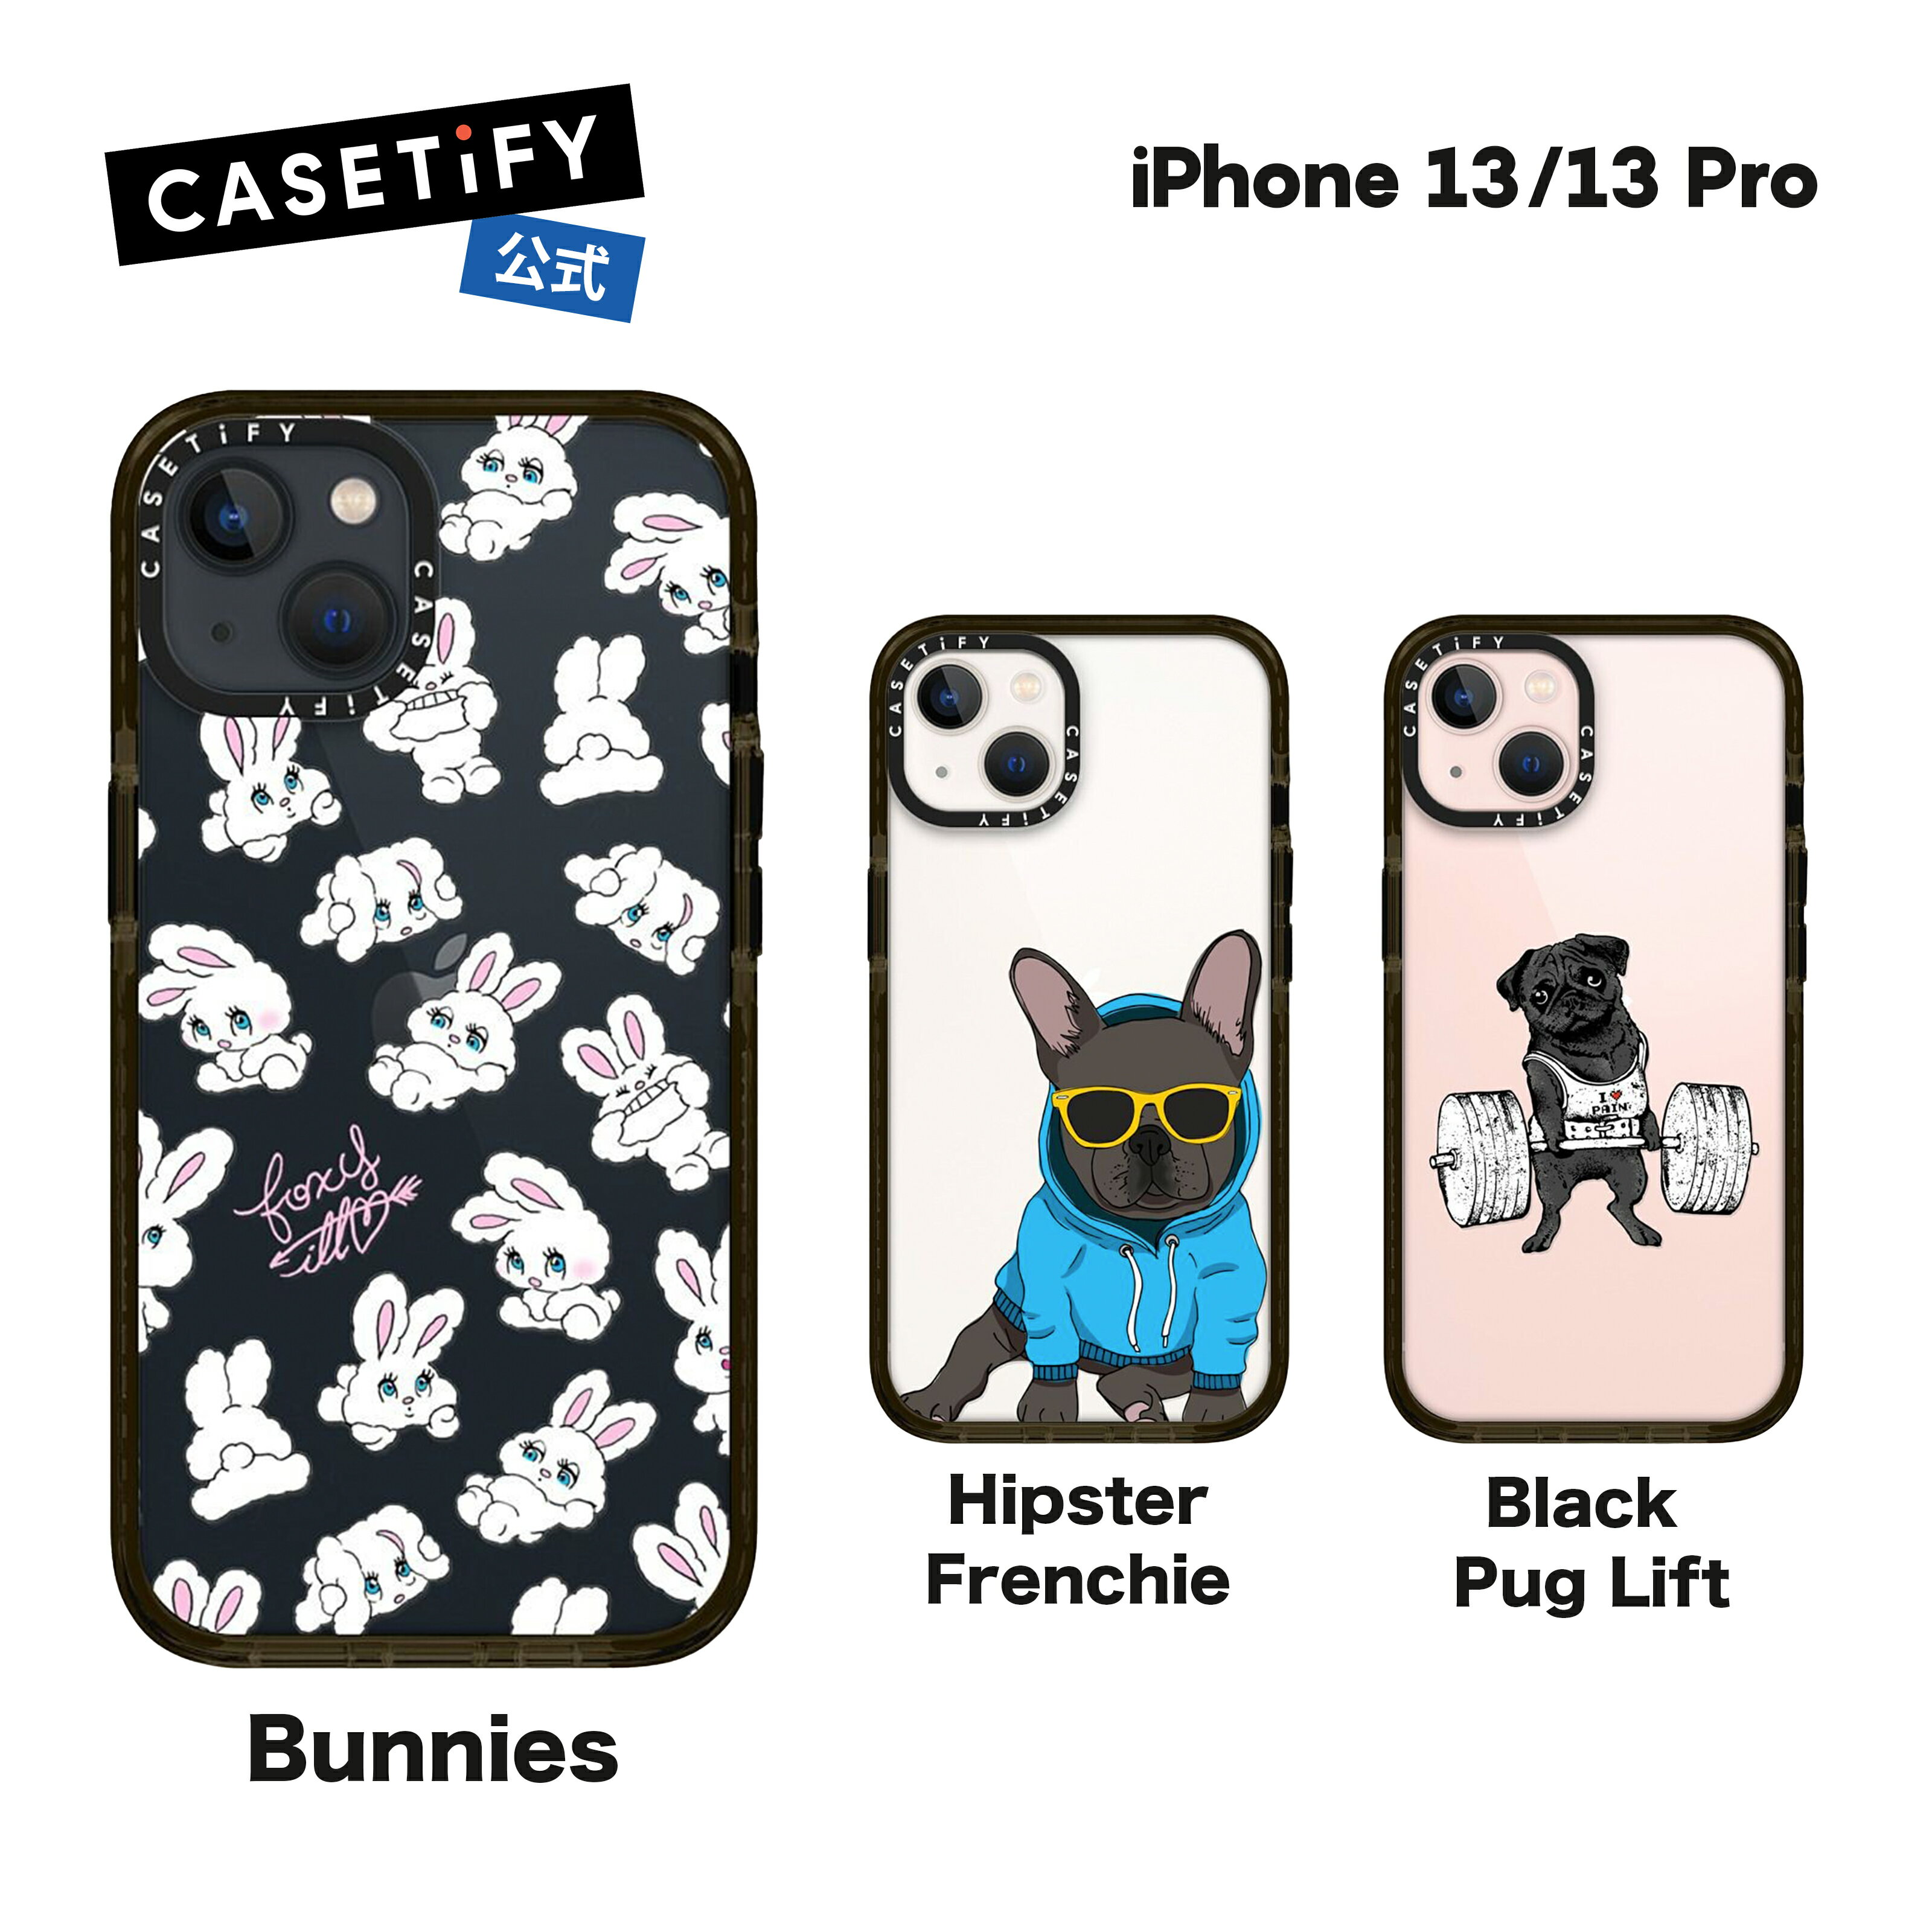  CASETiFY iPhone13 iPhone 13Pro インパクトケース Bunnies Hipster Frenchie Black Pug Lift 耐衝撃保護ケース